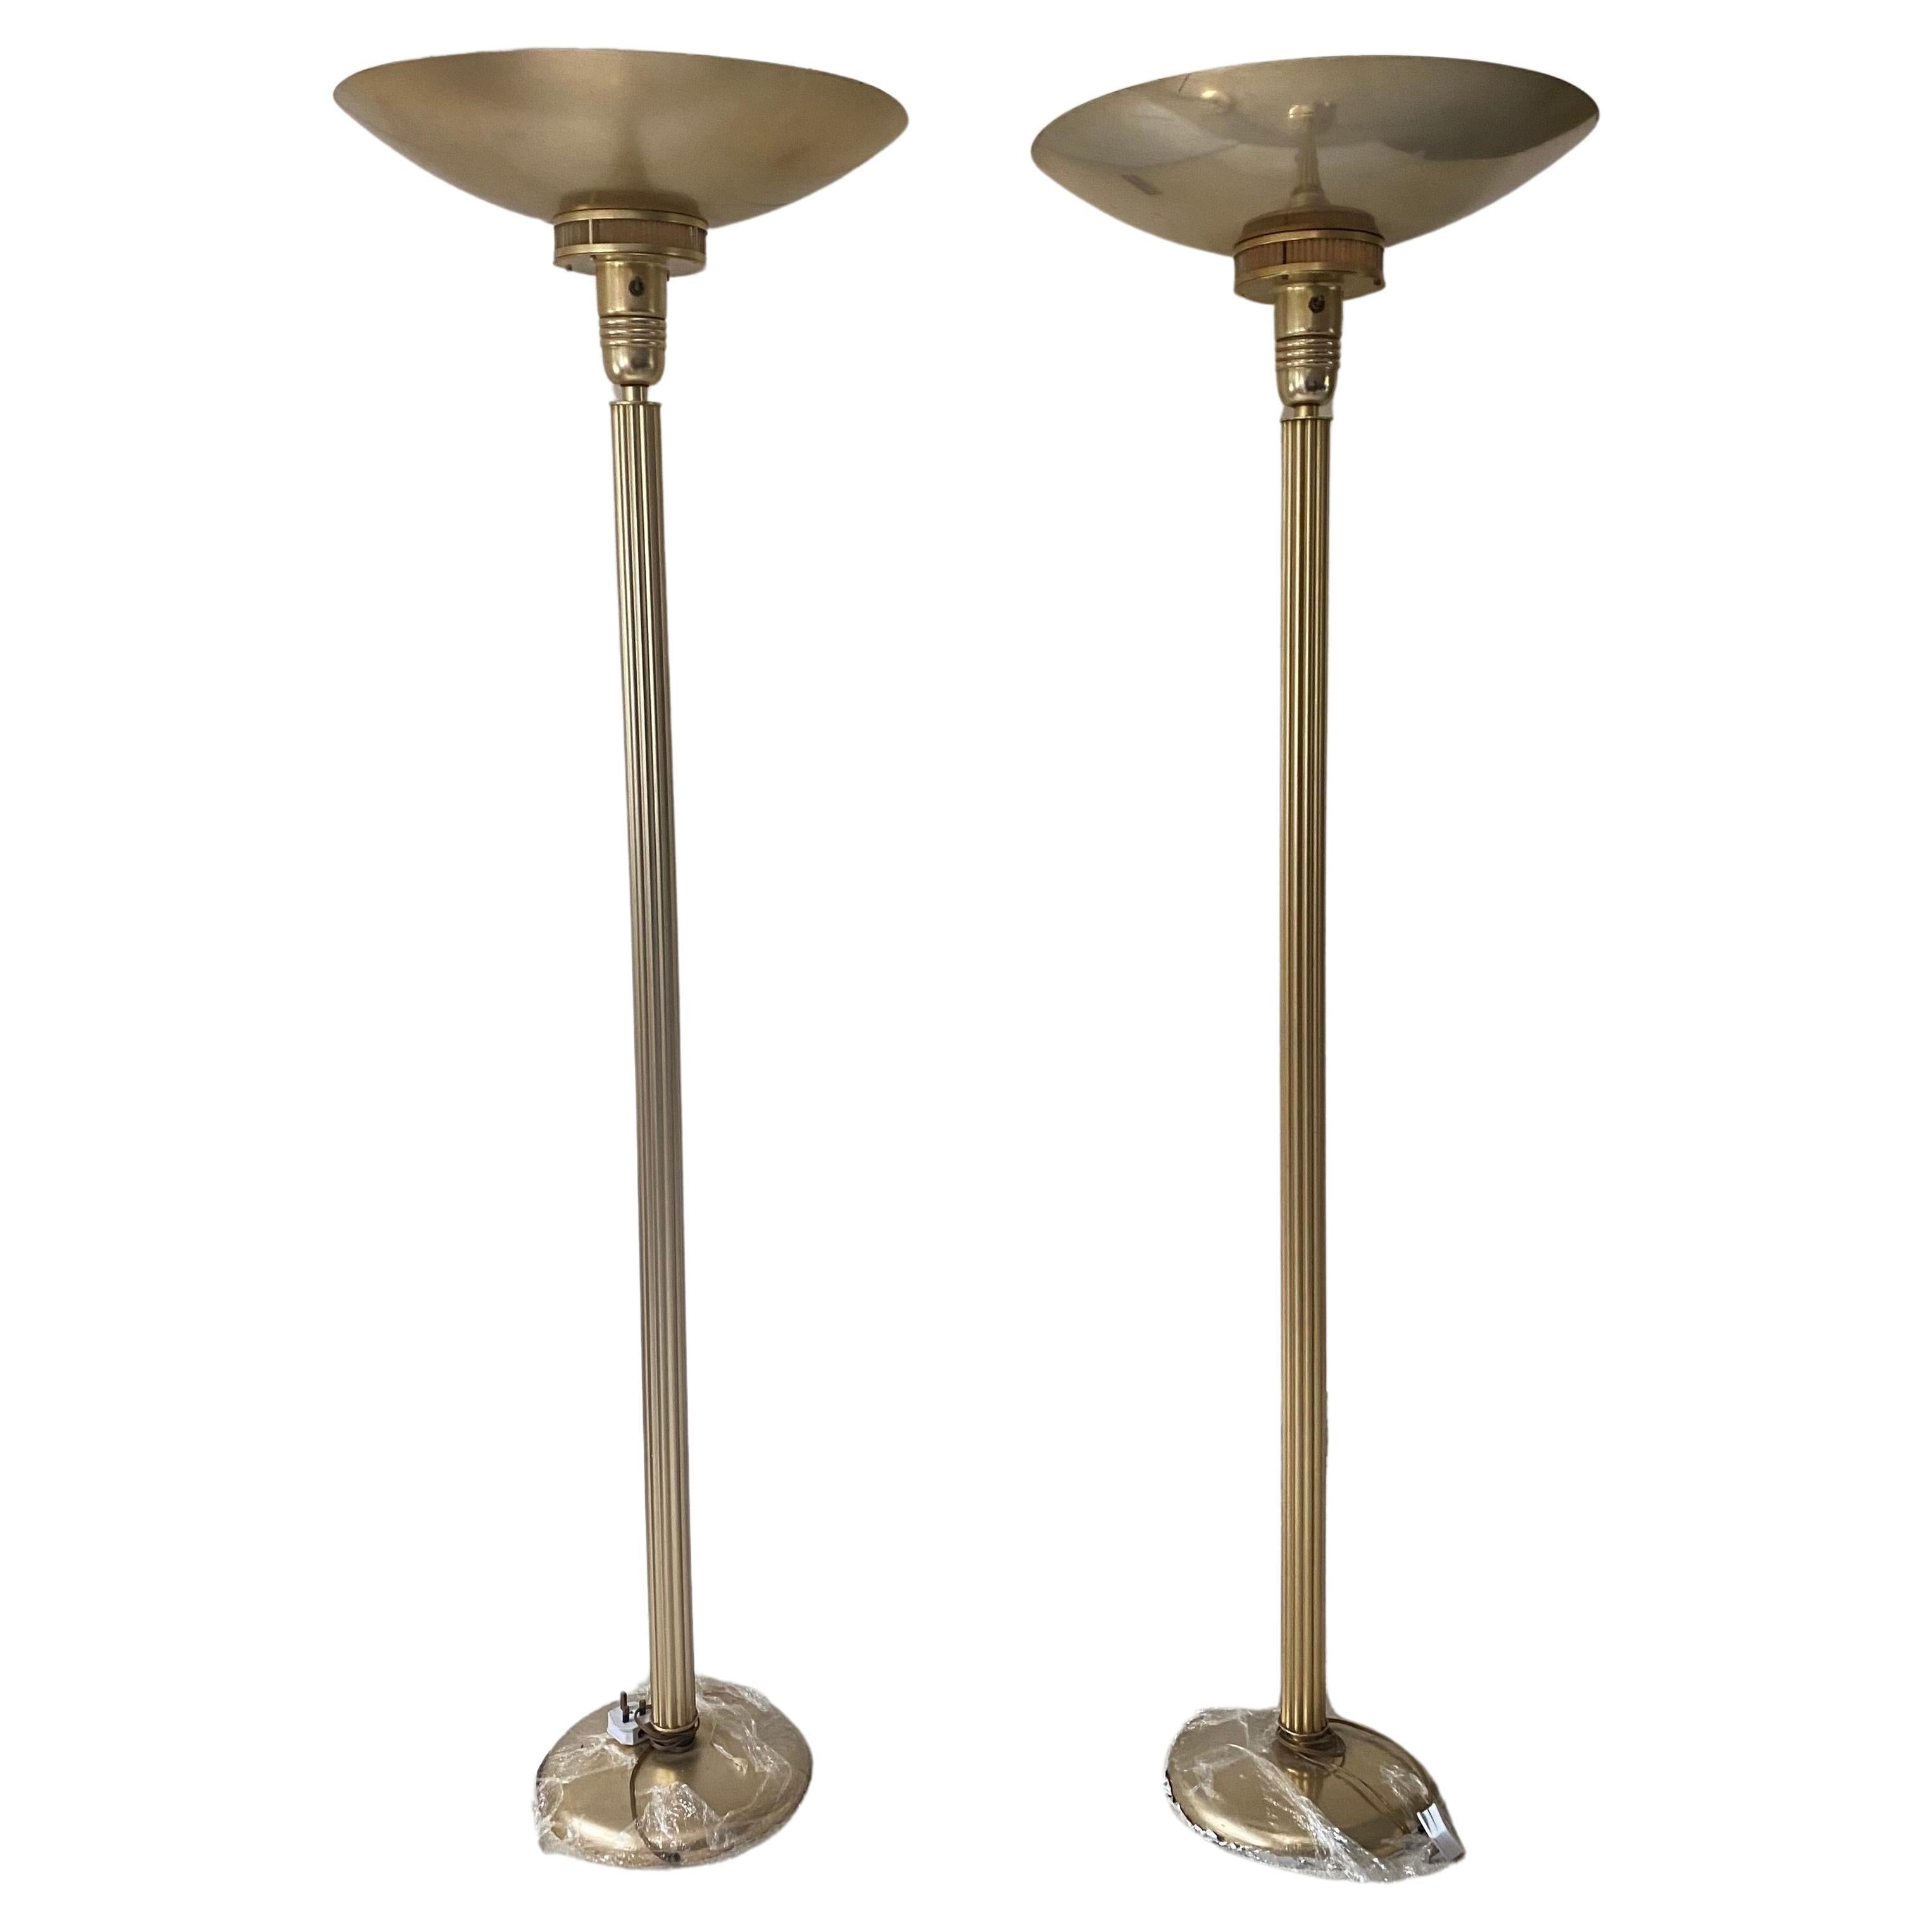 A Pair of Art Deco Floor Lamps Large Dish Uplighters Circa 1920's Torchiers  For Sale 1